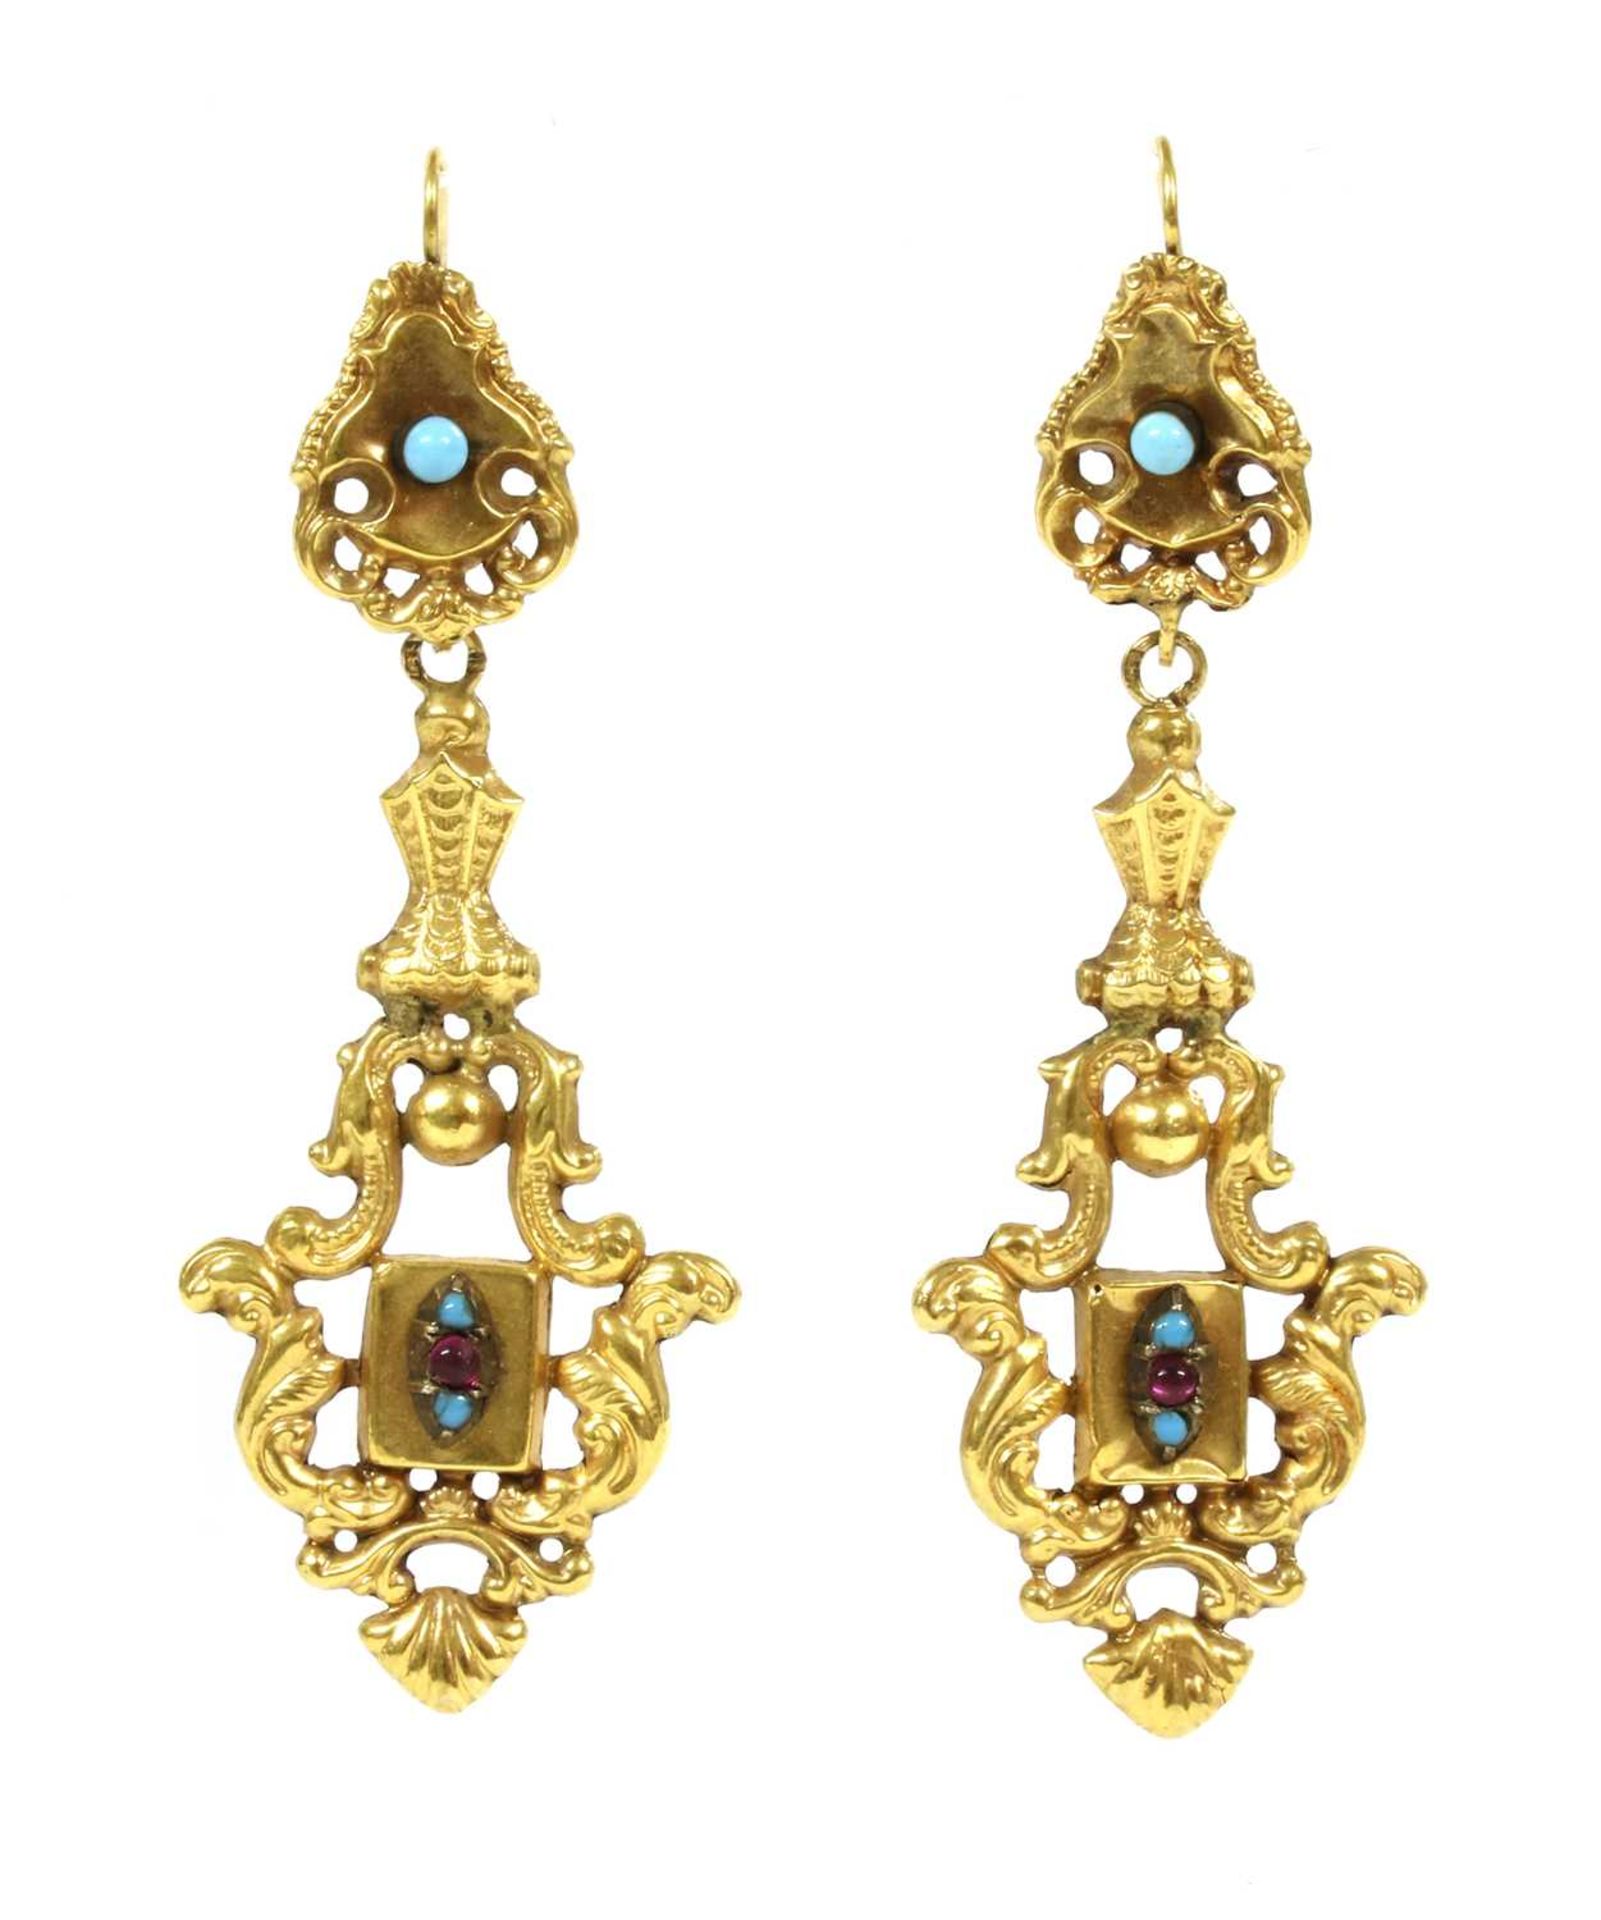 A pair of early Victorian gold repoussé rococo-style drop earrings,